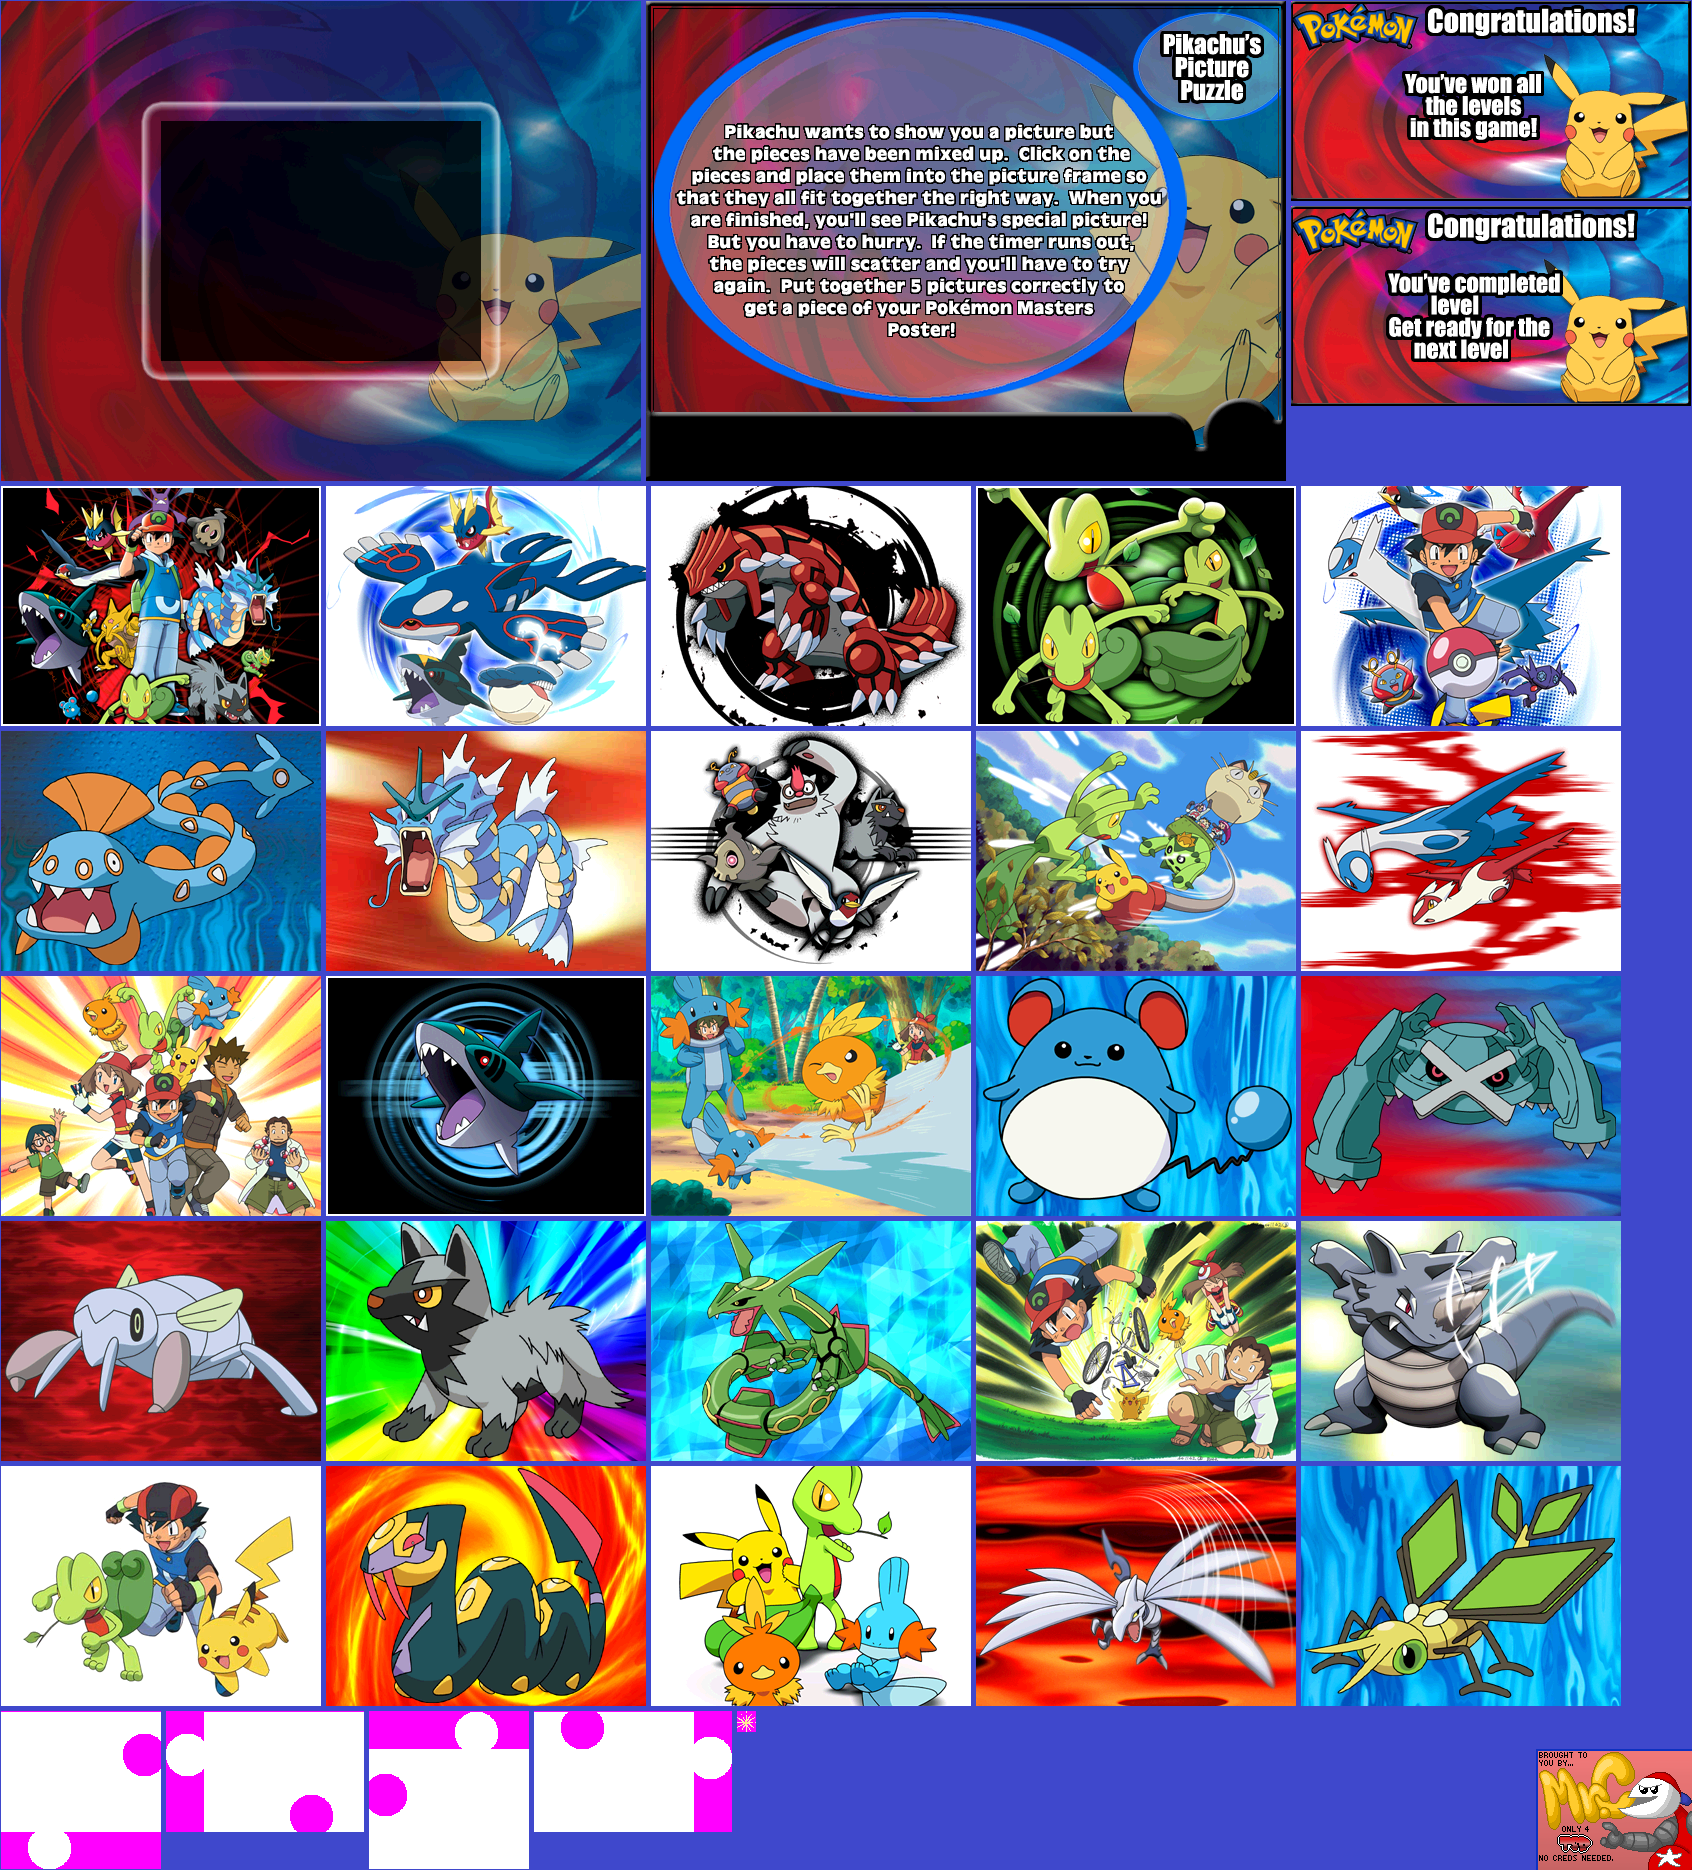 Pokémon Masters Arena : ValuSoft : Free Download, Borrow, and Streaming :  Internet Archive